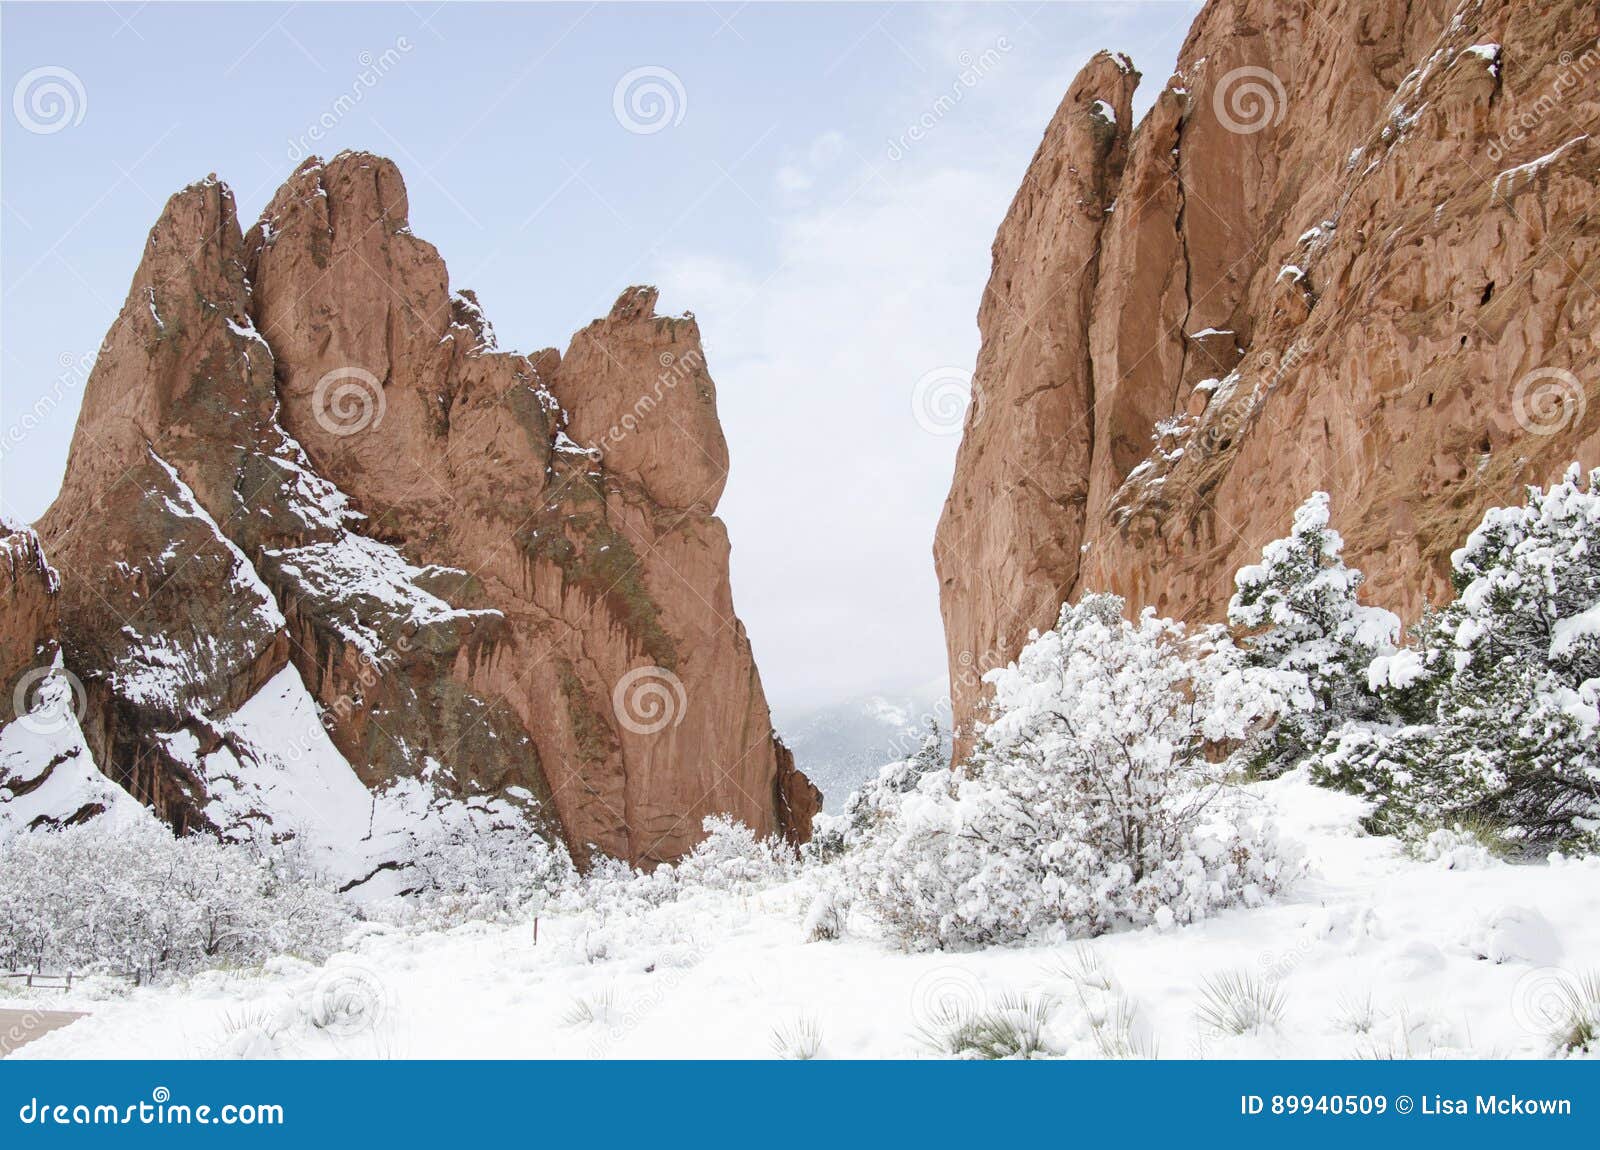 Garden Of The Gods Park In Winter Stock Image Image Of Snowy